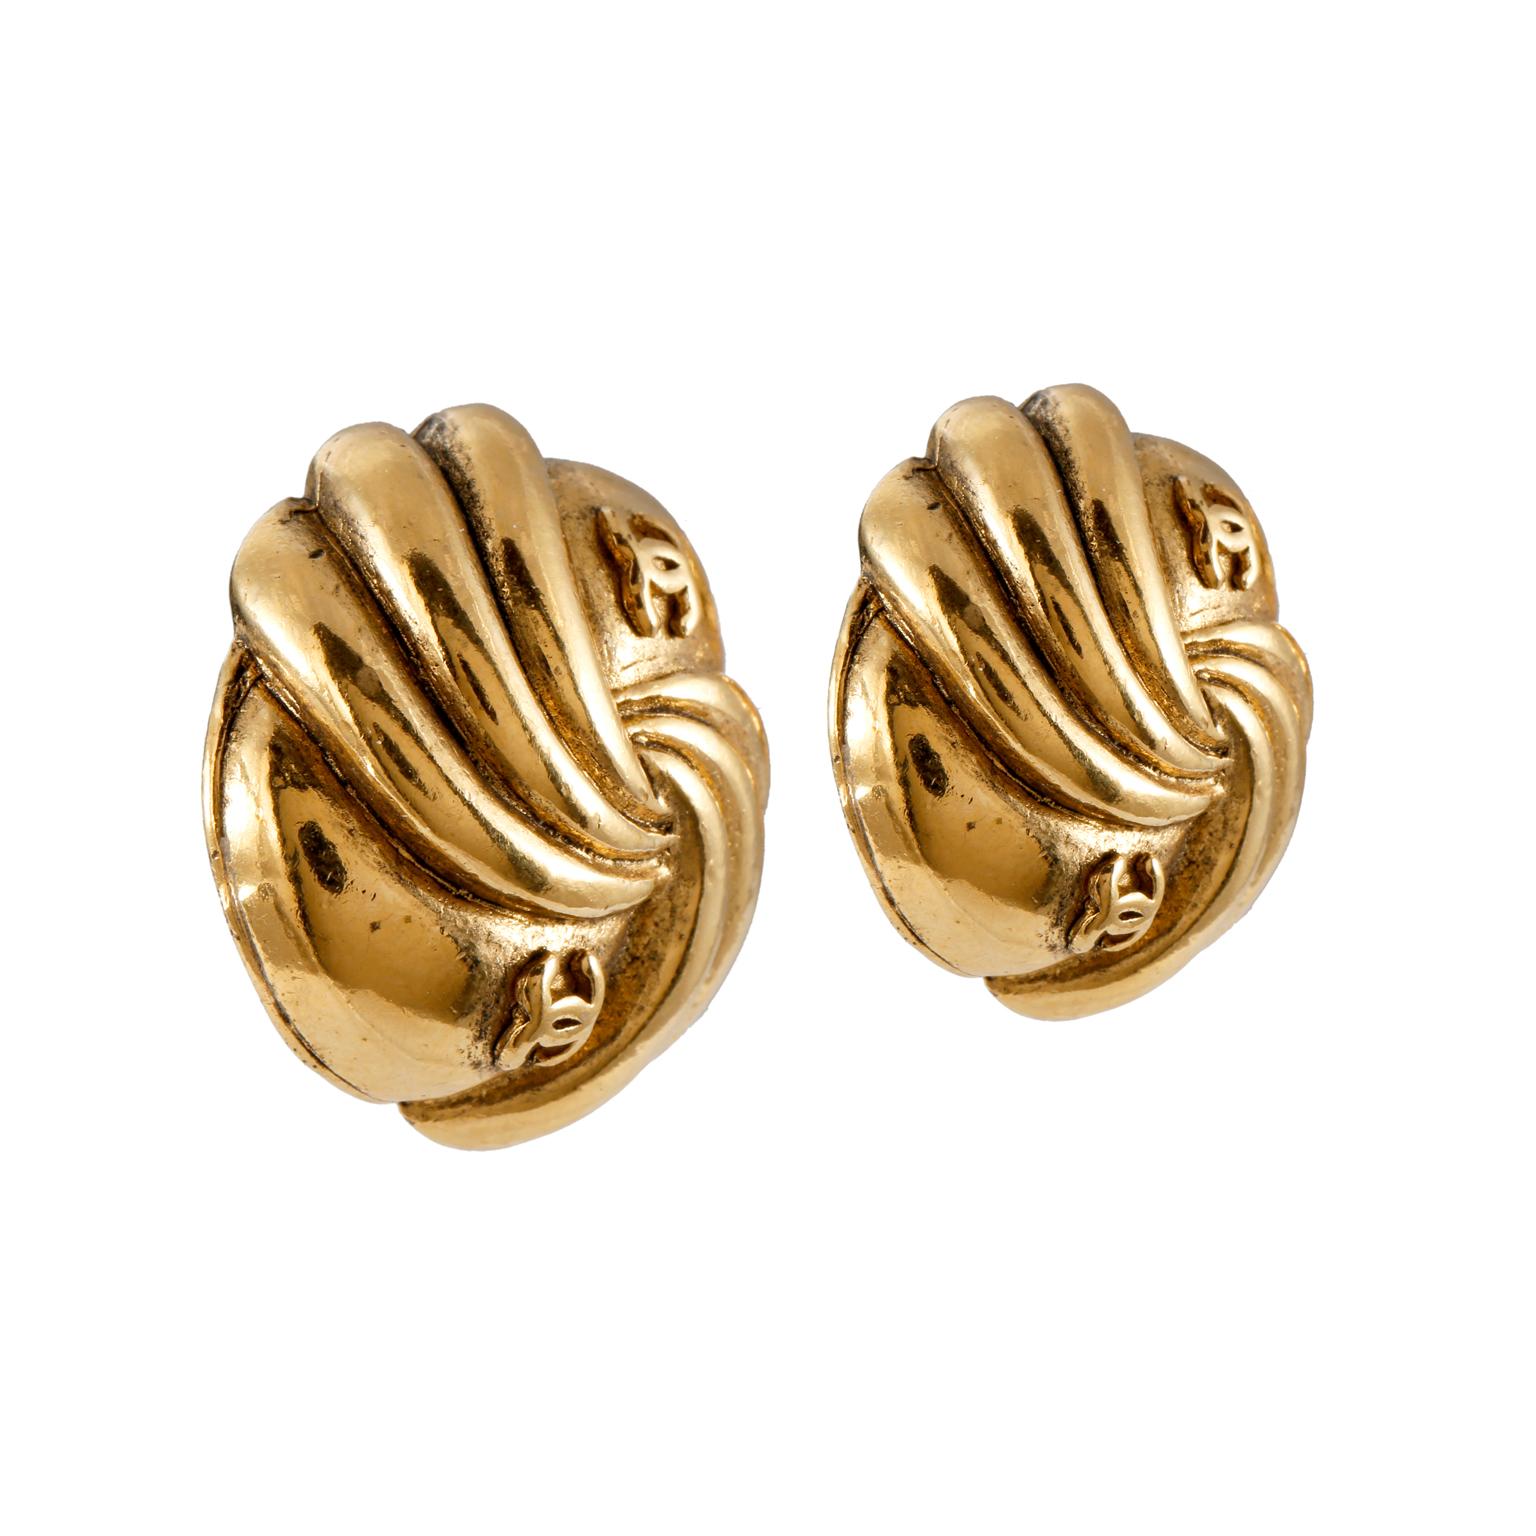 These authentic Chanel Gold CC Swirled Button Earrings are in very good condition from the mid to late 1980’s.  Gold tone swirling pattern with interlocking cc’s. Clip on closure.  Made in France.  

